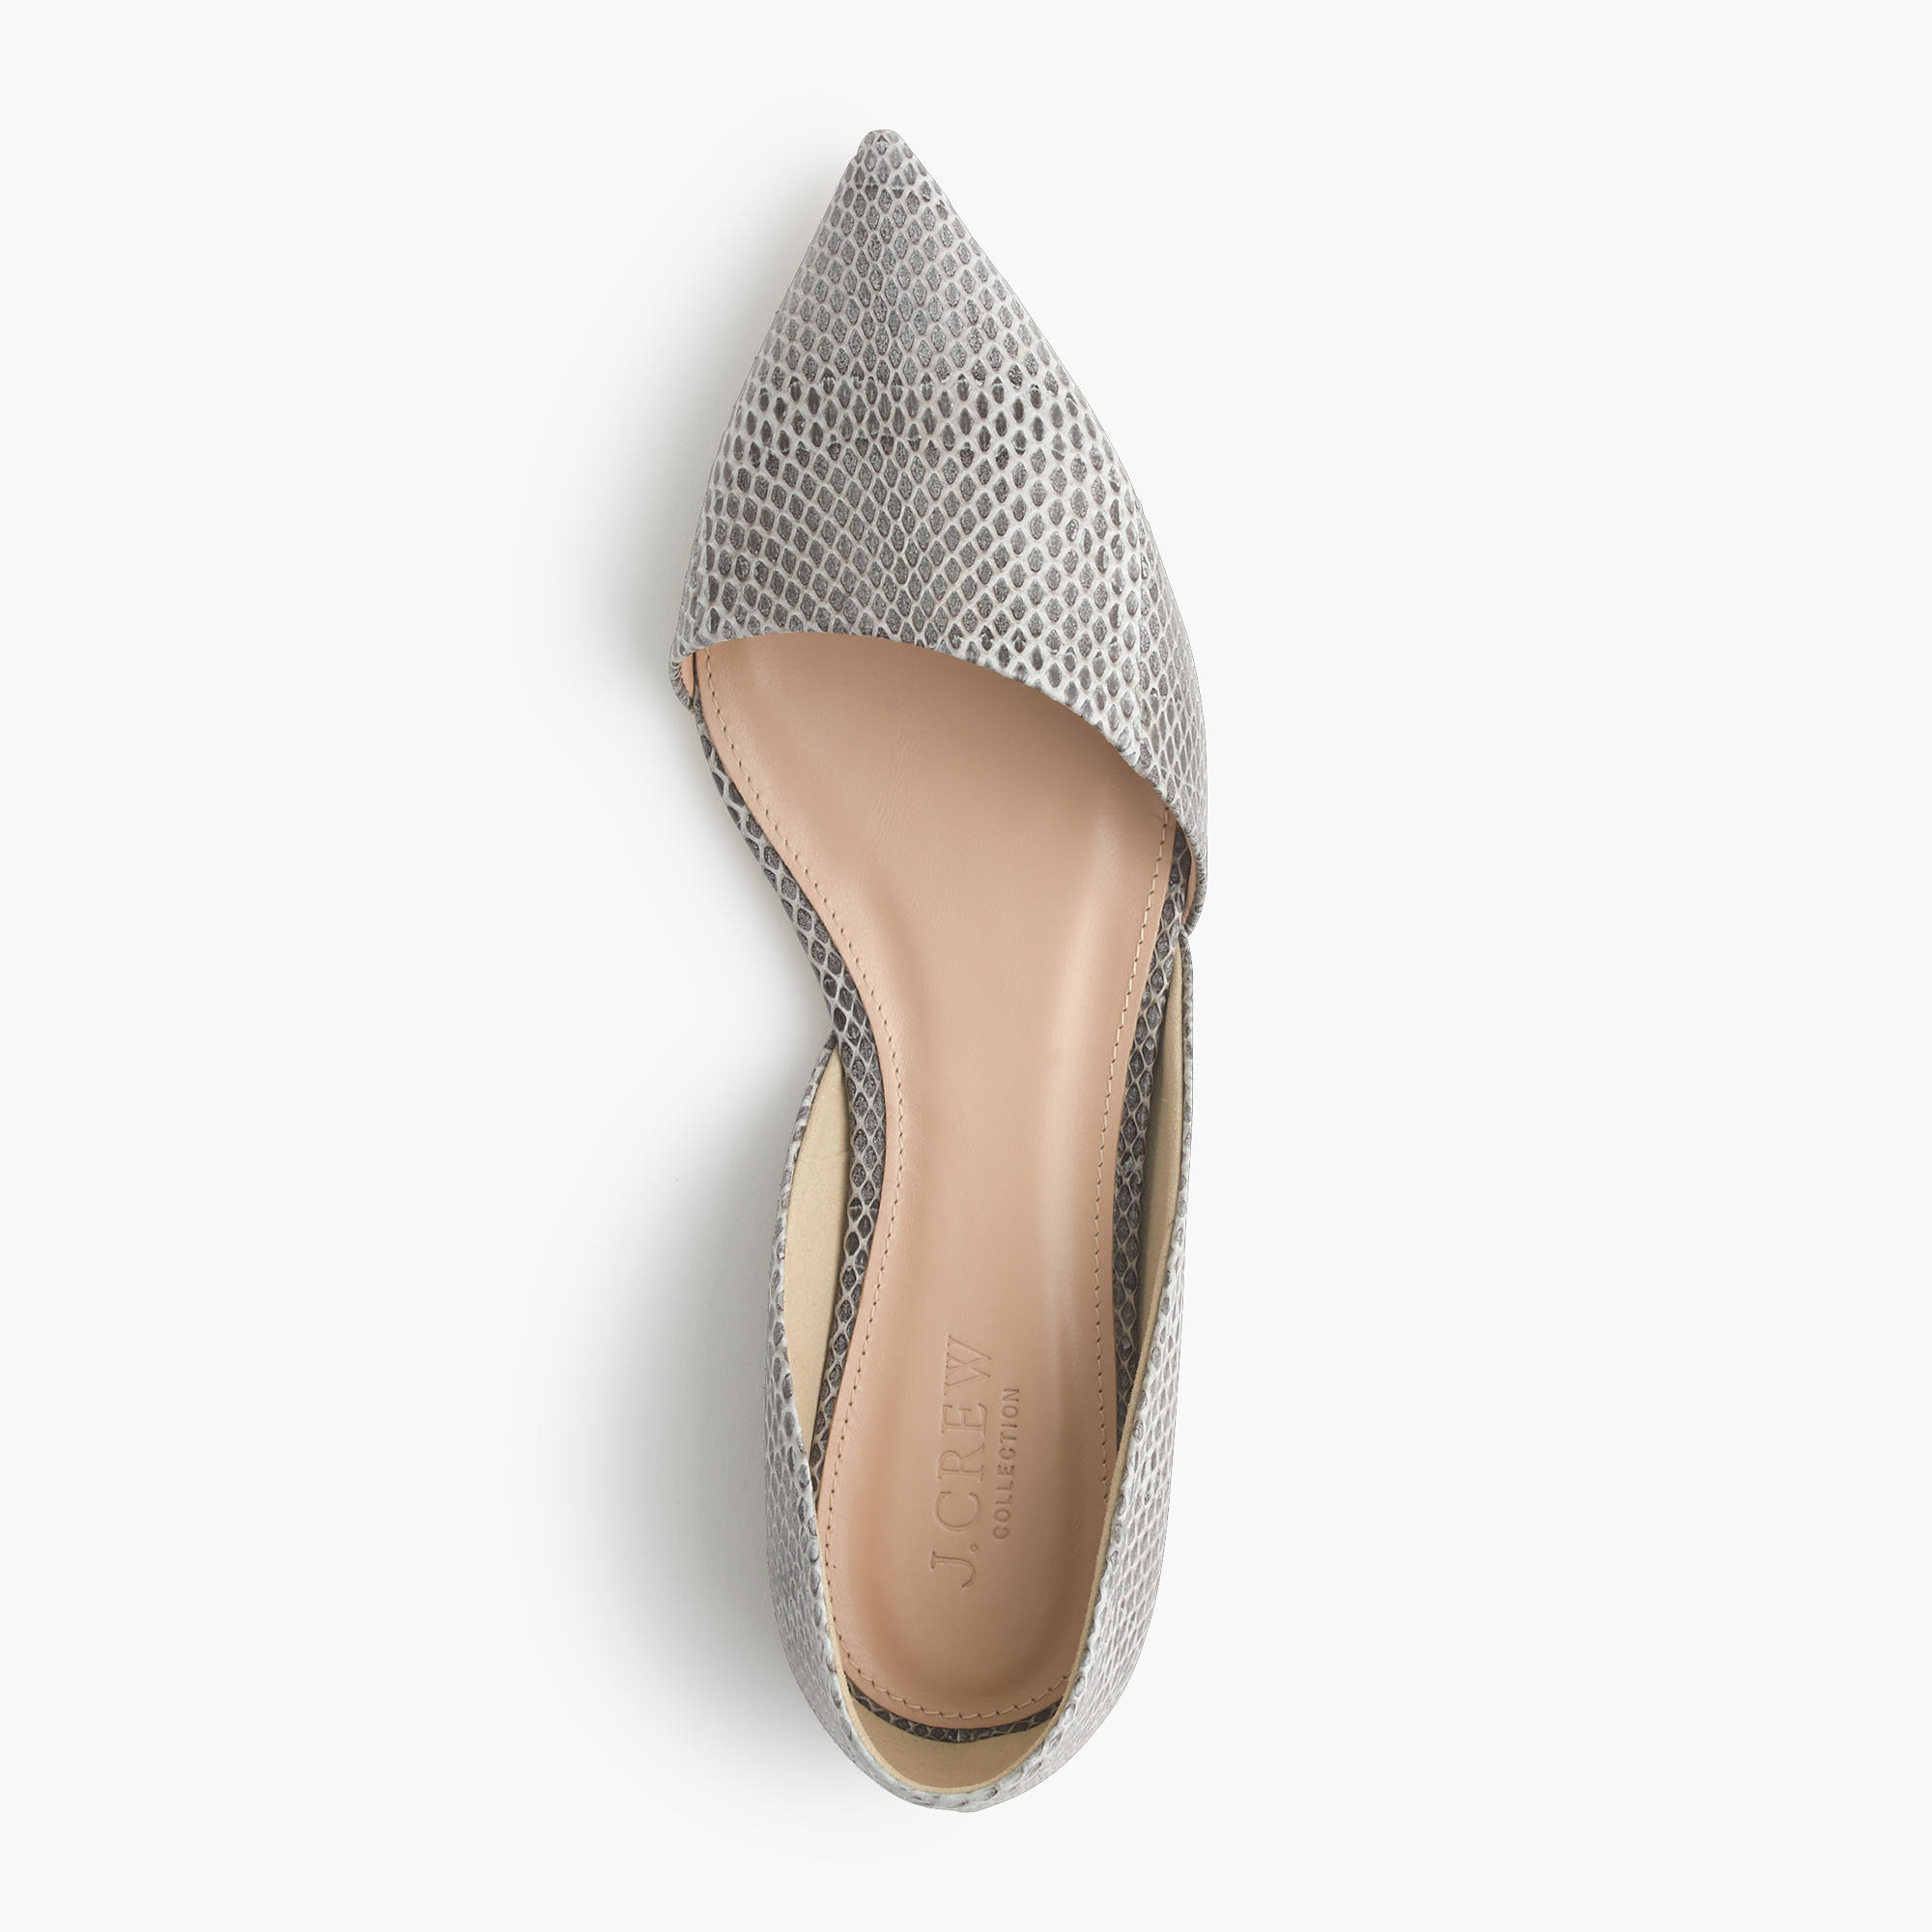 J.crew Collection Sloan Snakeskin D'orsay Flats in Gray | Lyst